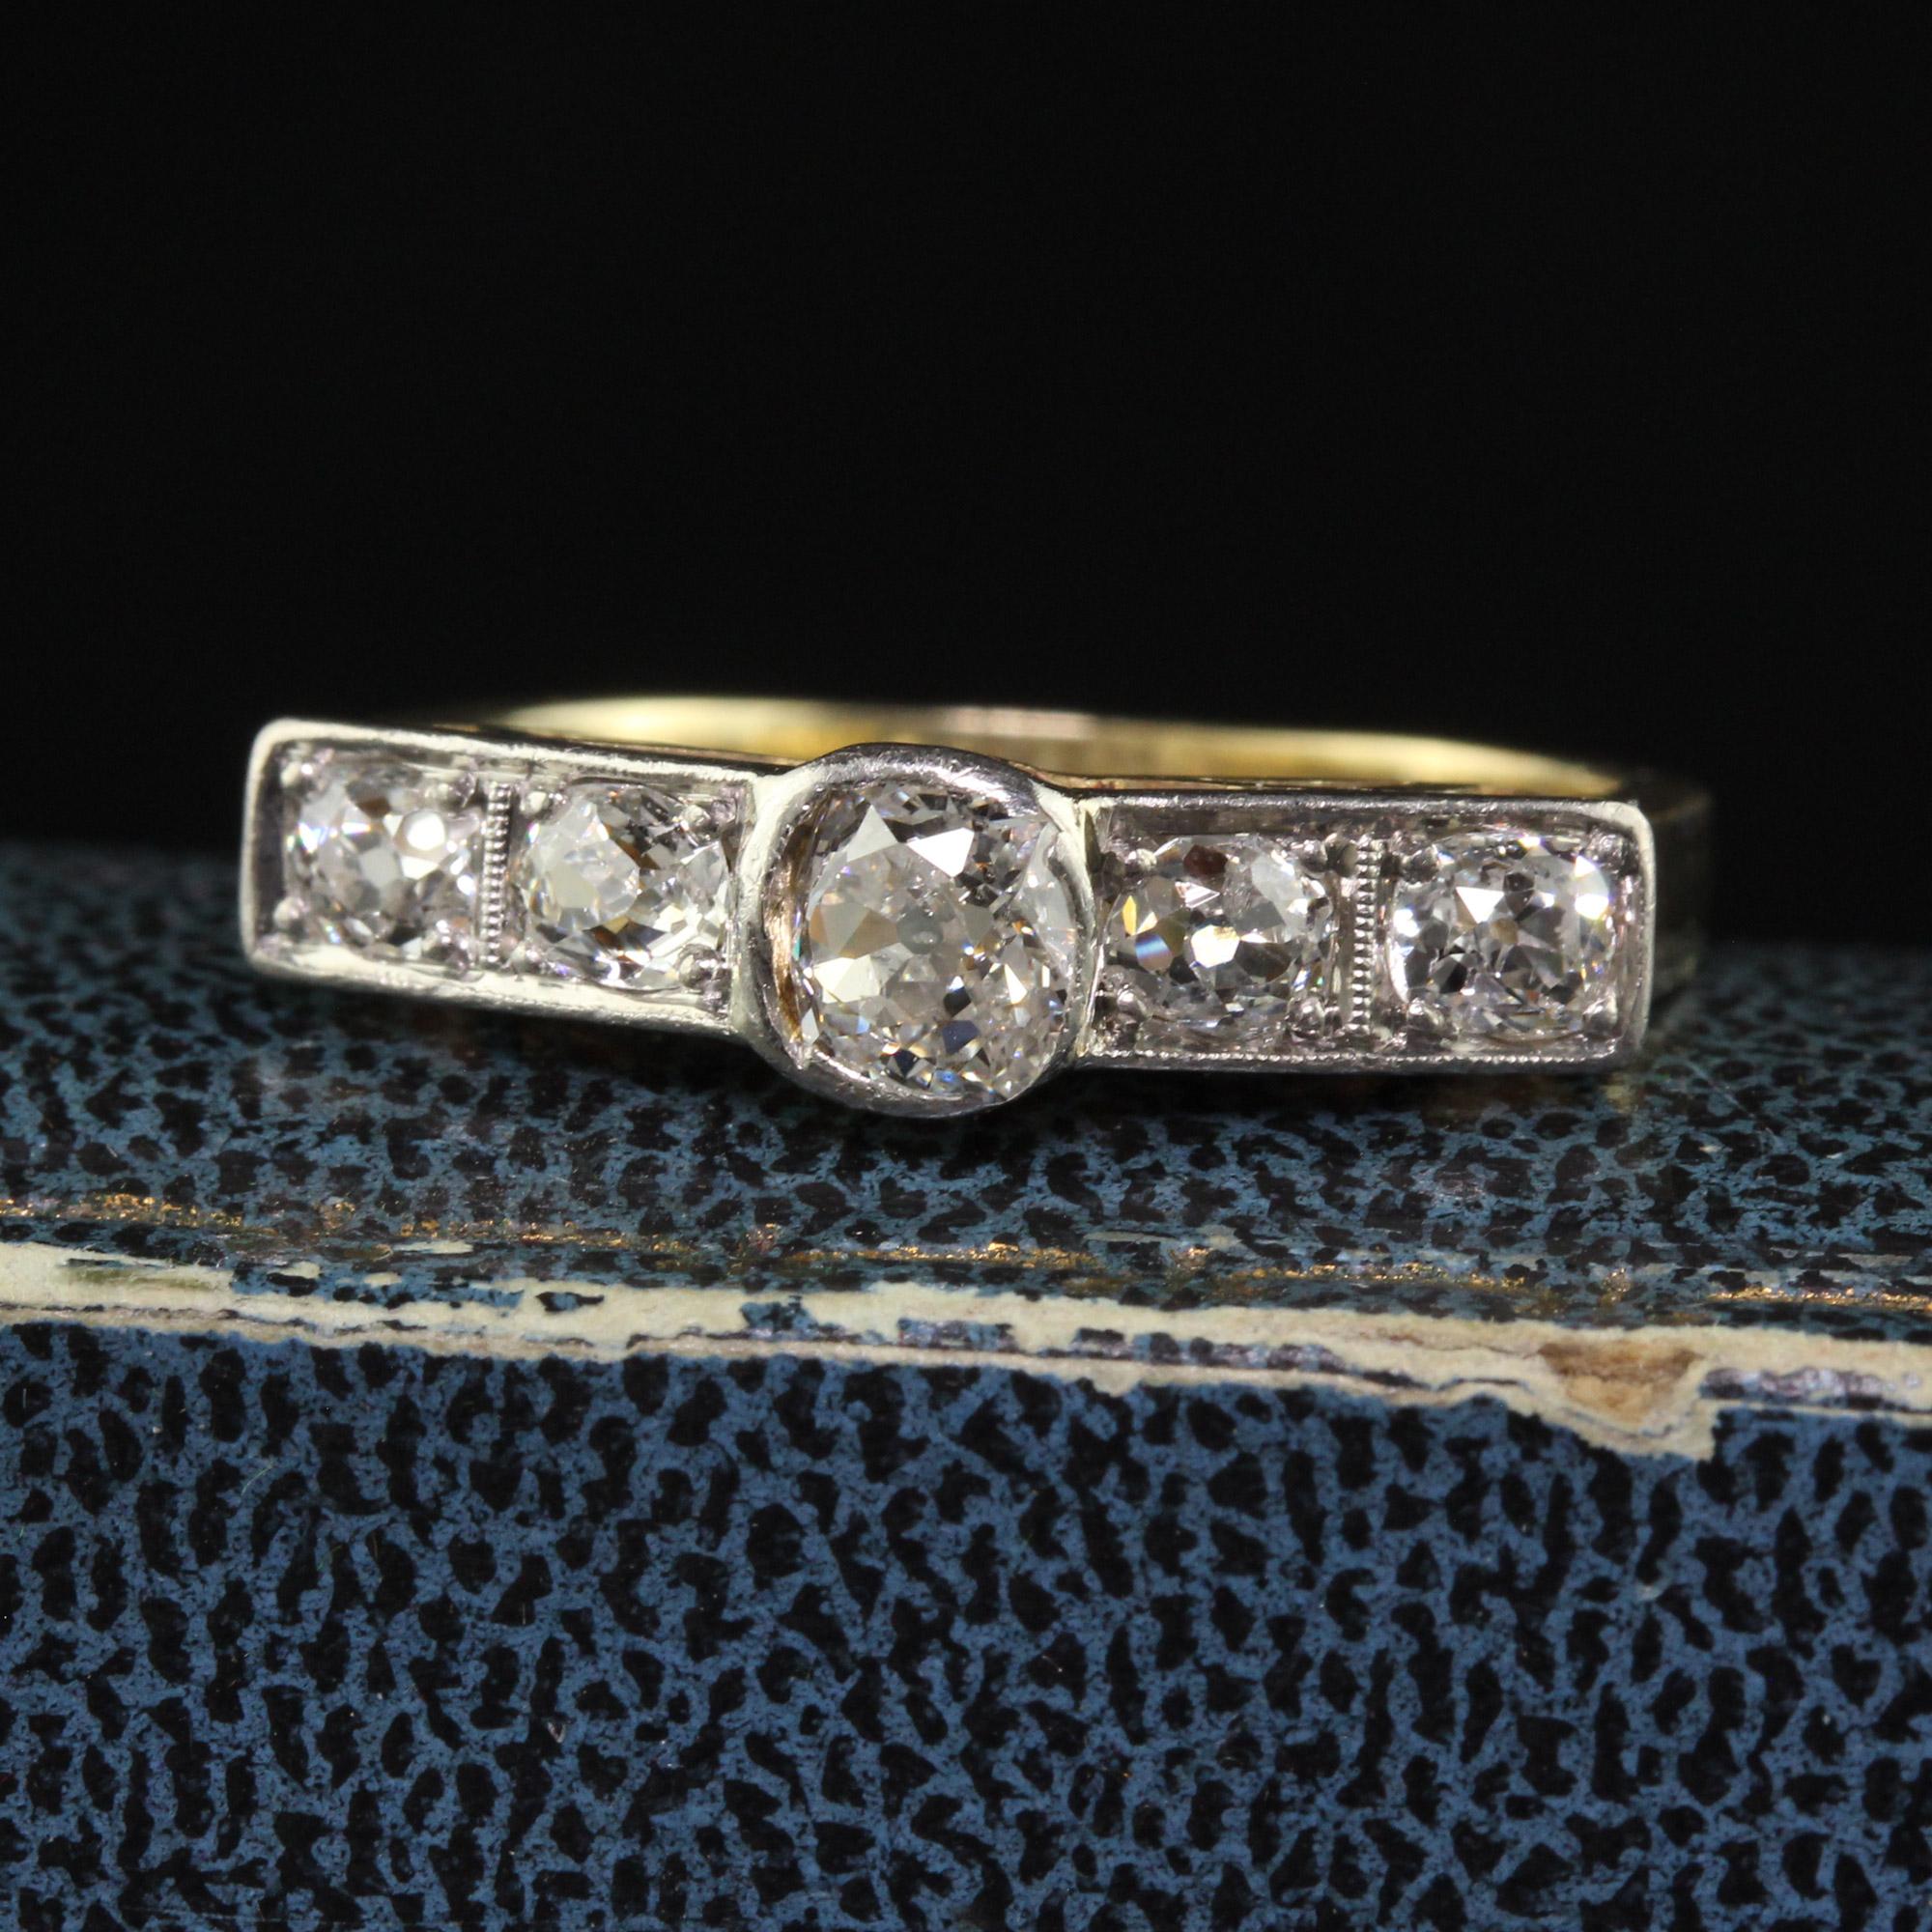 Beautiful Antique Art Deco 14K Yellow Gold Old Mine Diamond Wedding Band Ring. This beautiful ring is crafted in 14k yellow gold and white gold top. There are old mine cut diamonds set on top of the ring and is in great condition. This ring can even